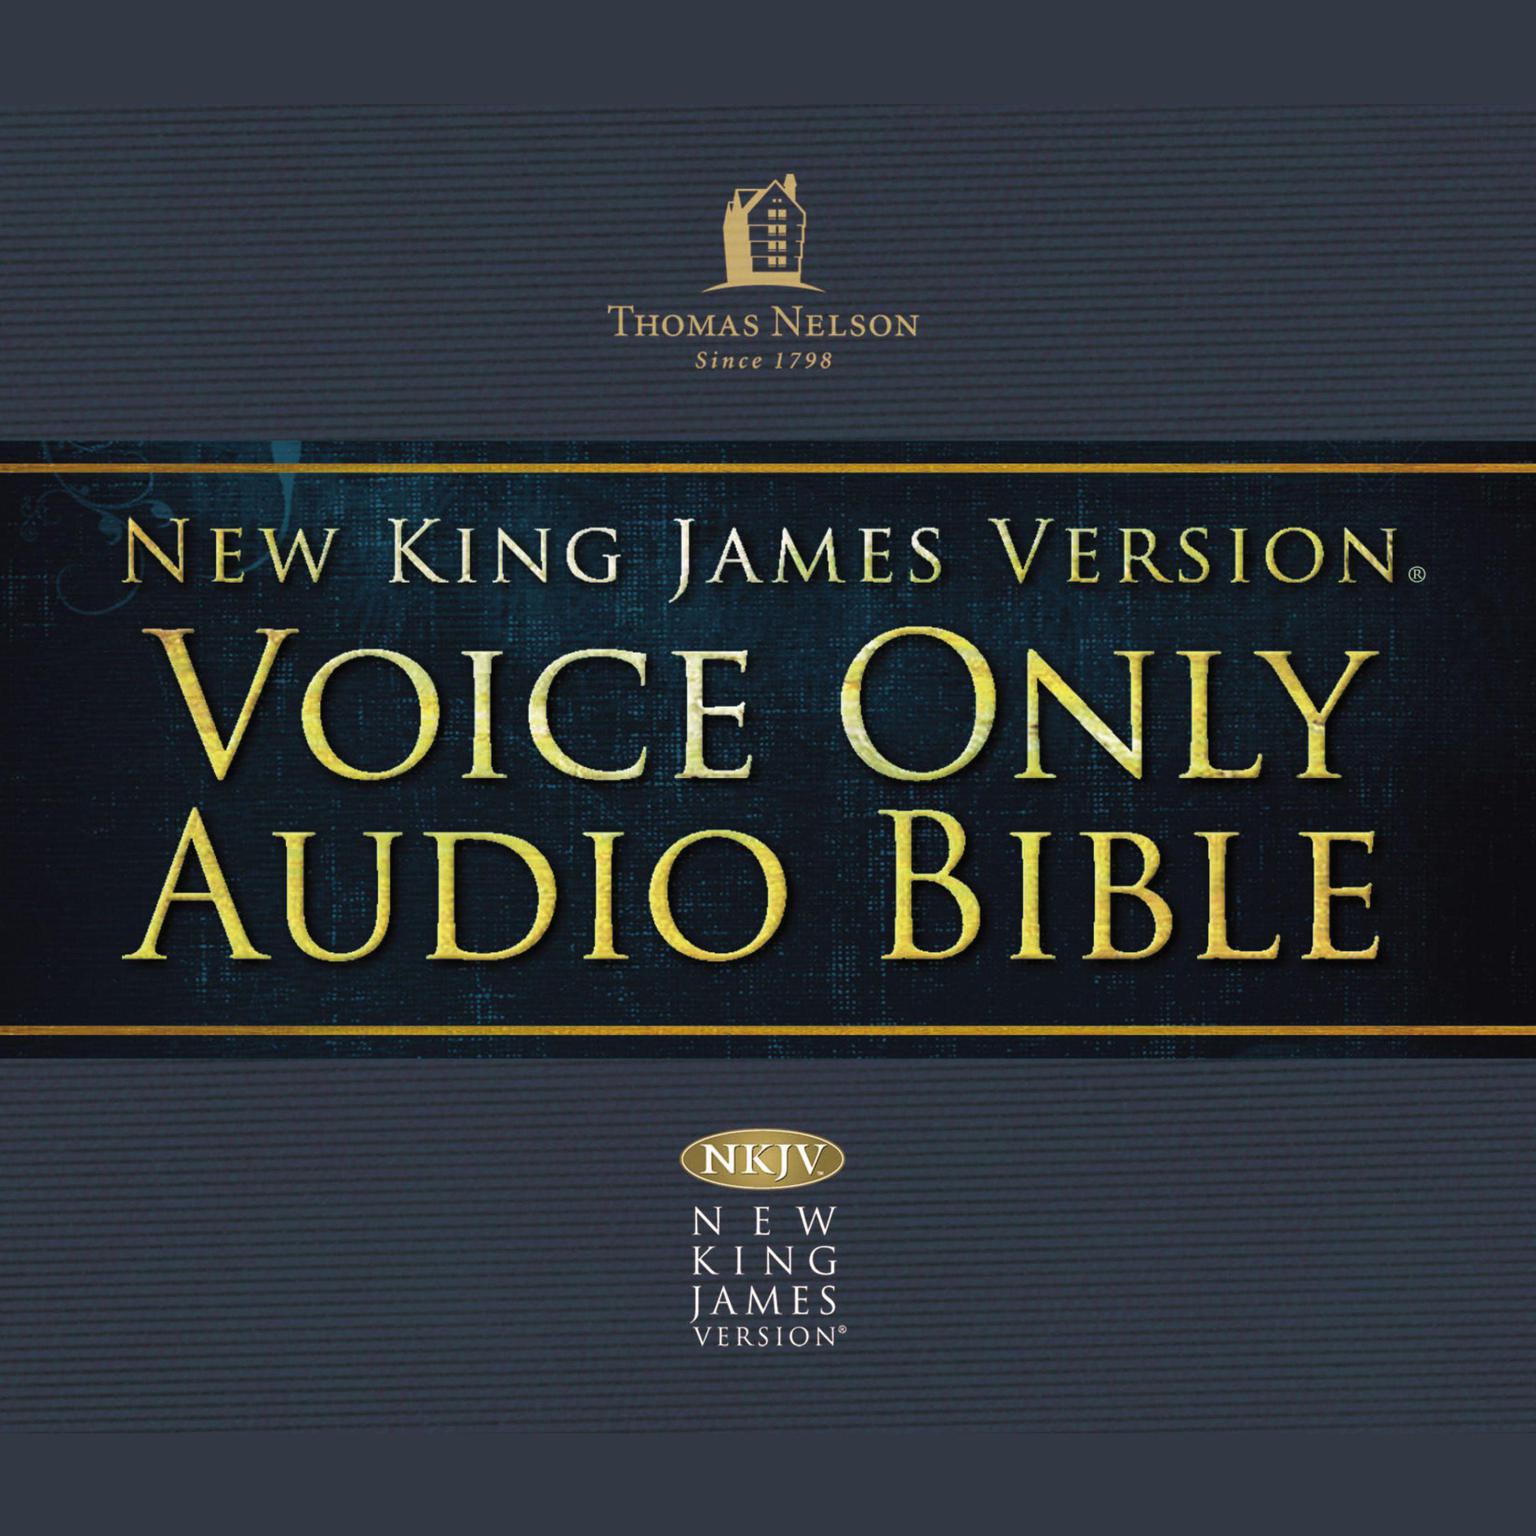 Voice Only Audio Bible - New King James Version, NKJV (Narrated by Bob Souer): (34) 1 and 2 Peter; 1, 2 and 3 John; and Jude: Holy Bible, New King James Version Audiobook, by Thomas Nelson